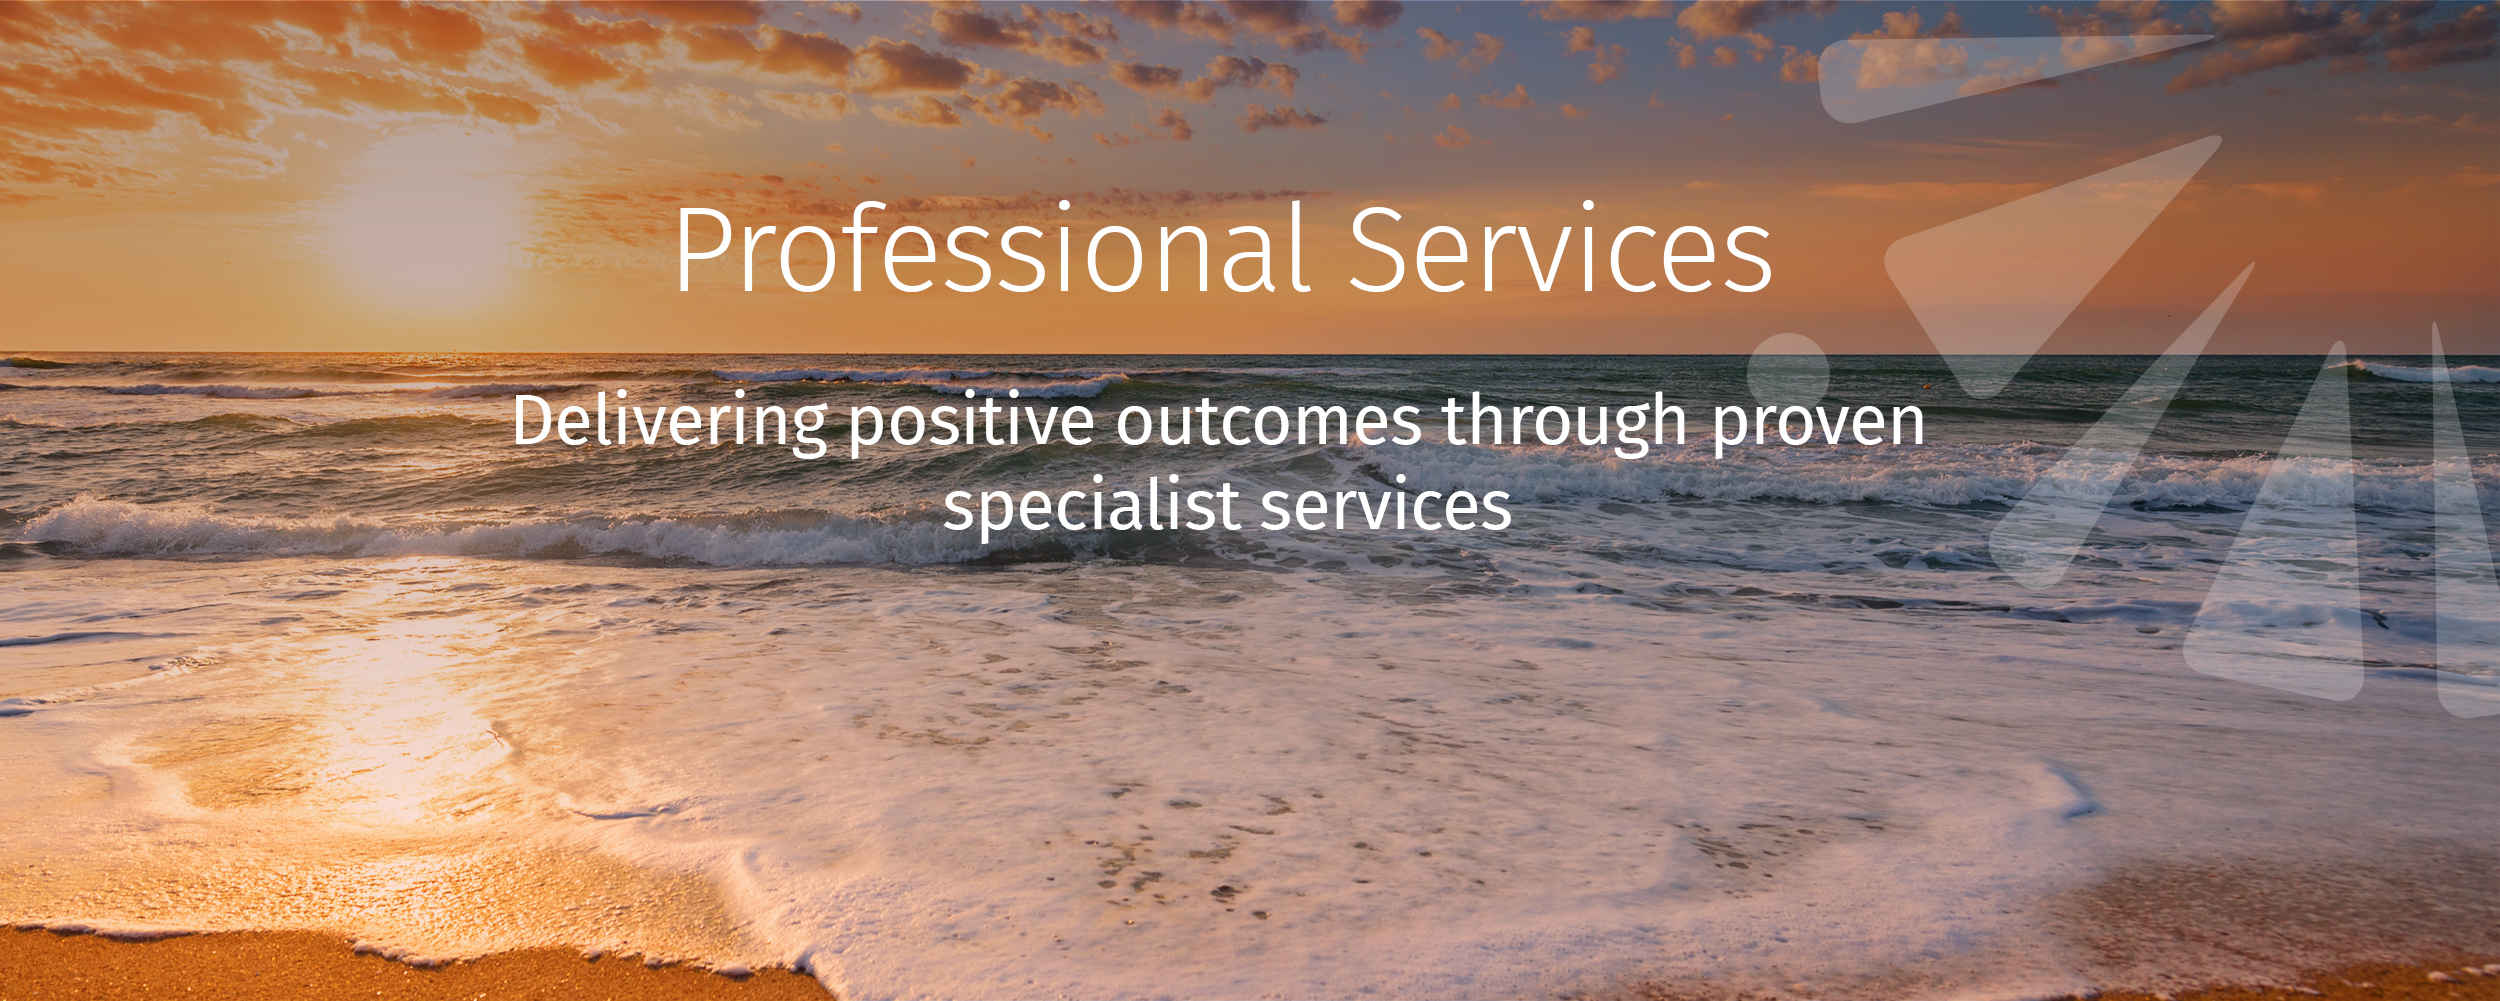 Delivrering positive outcomes through proven specialist services